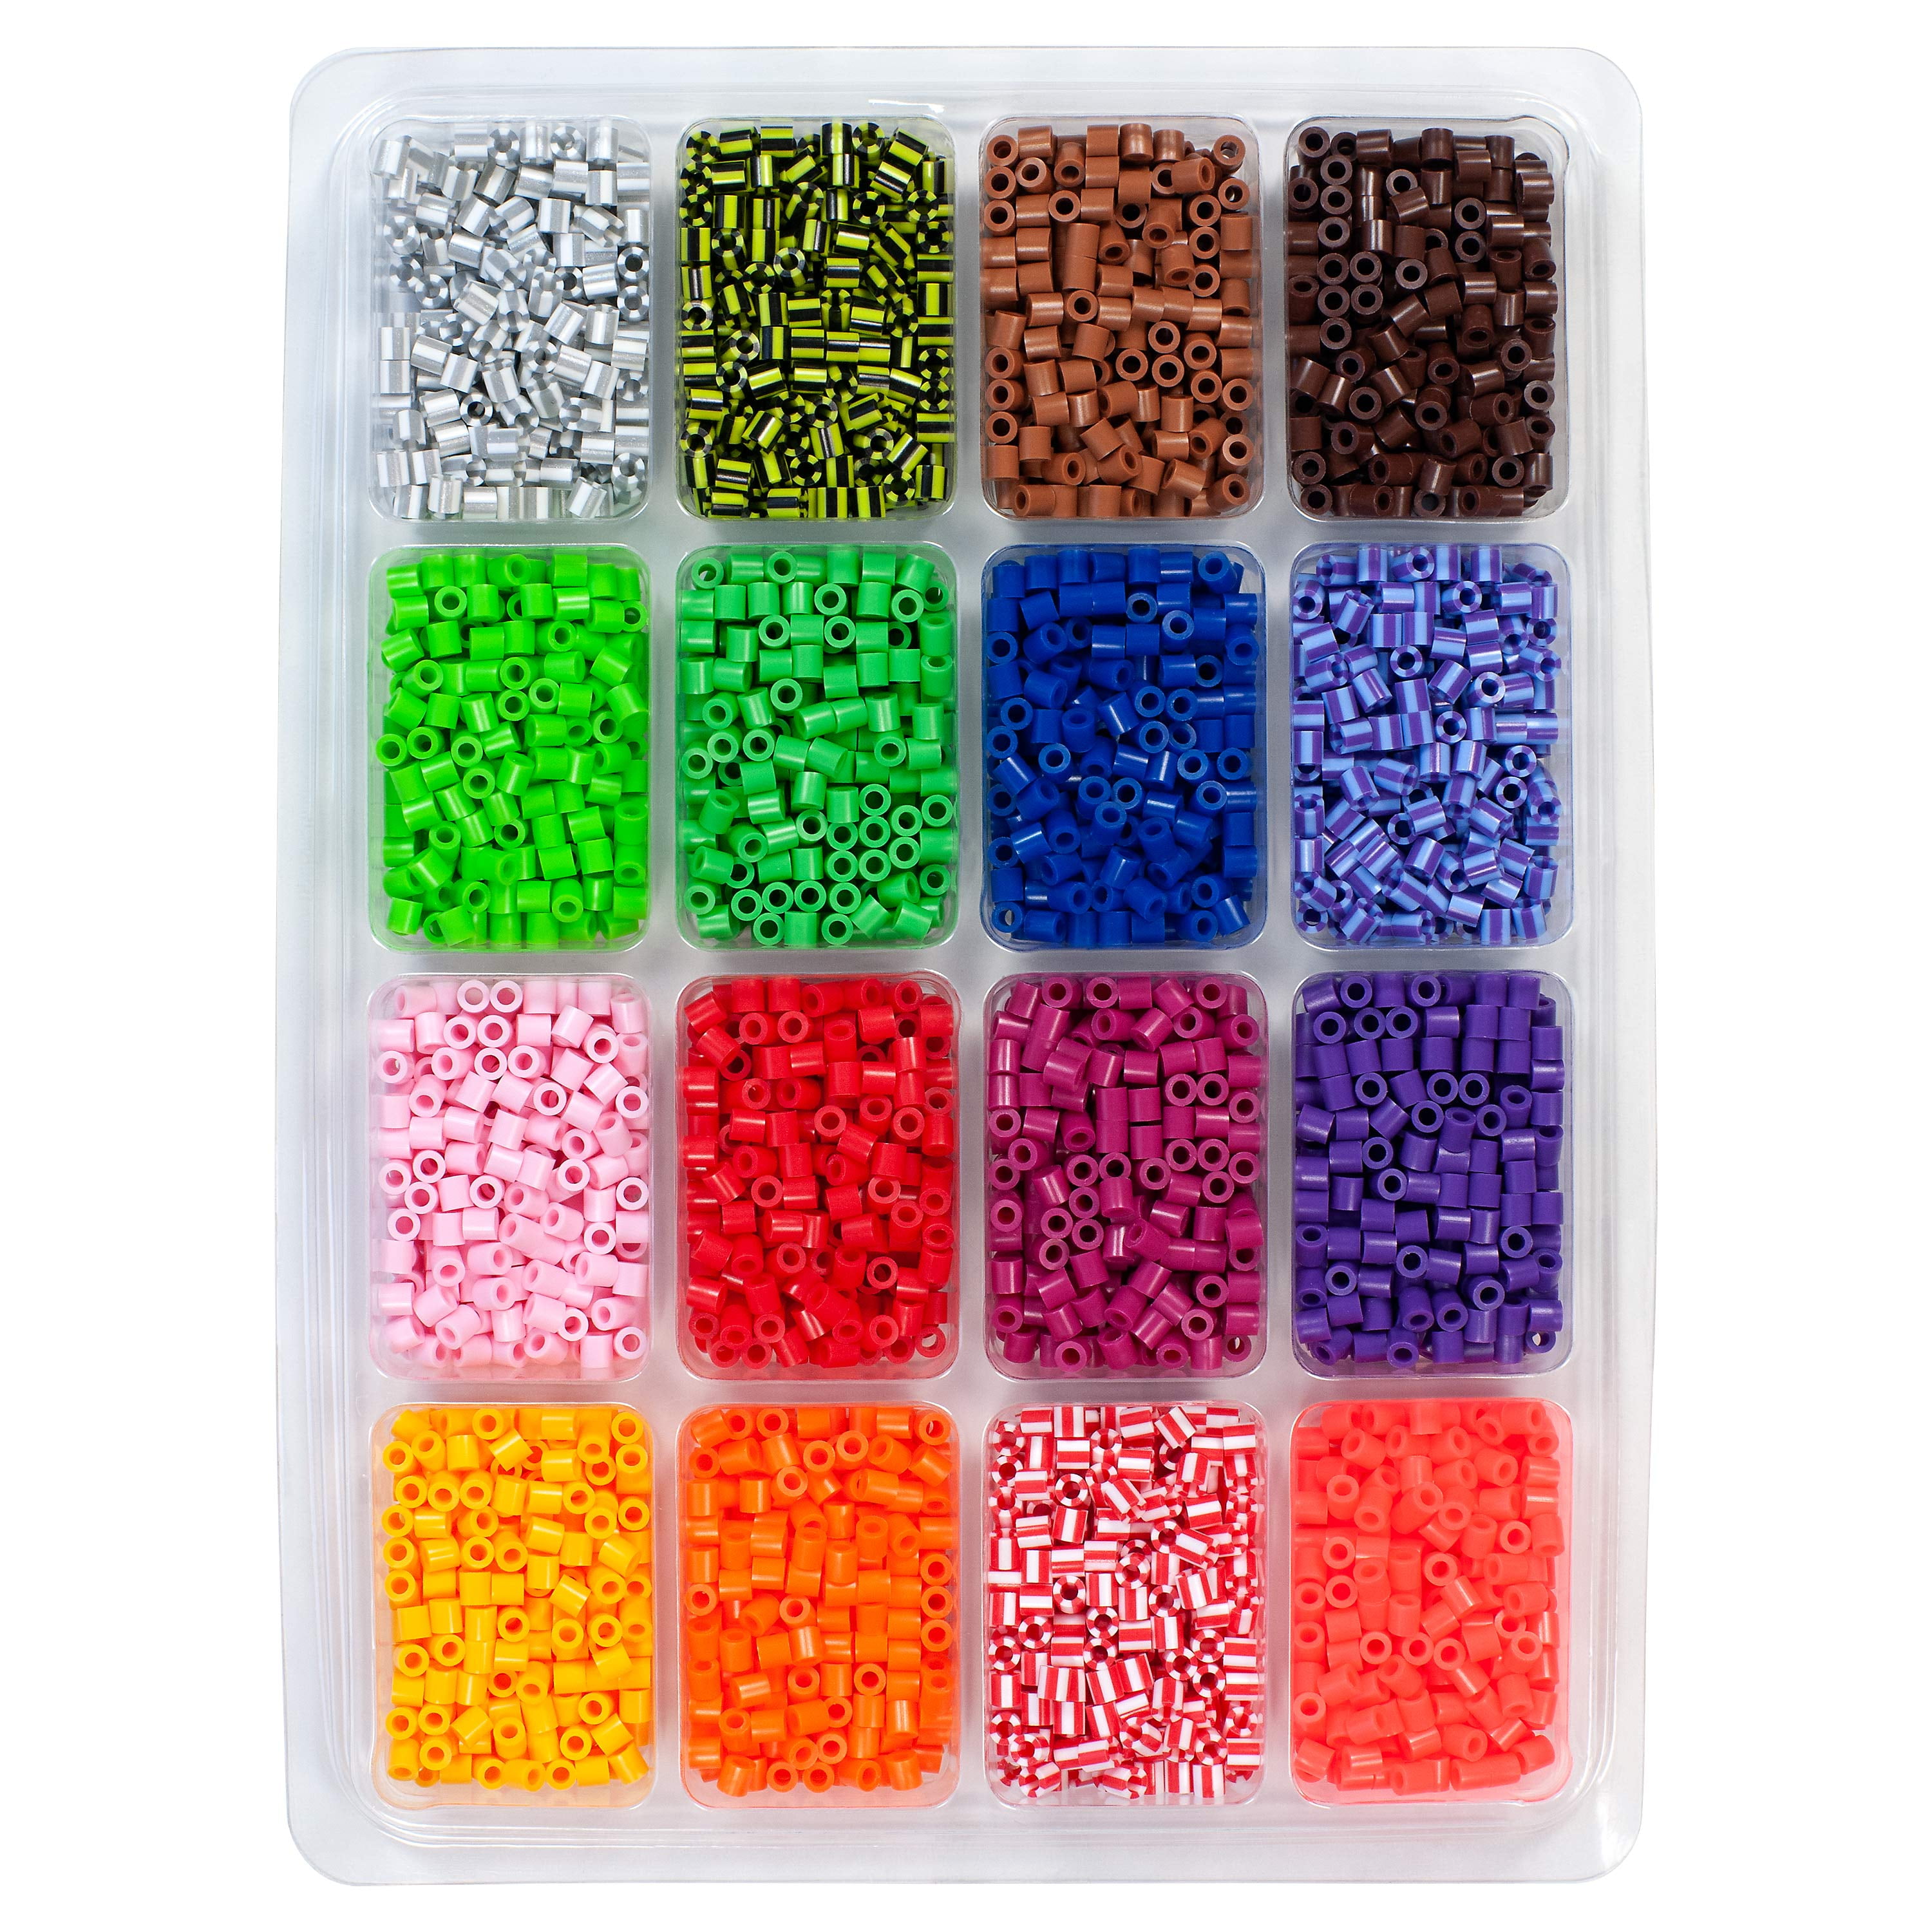 Perler Mini Beads Fused Bead Tray Cool 8,000 Count-Multipack of 3